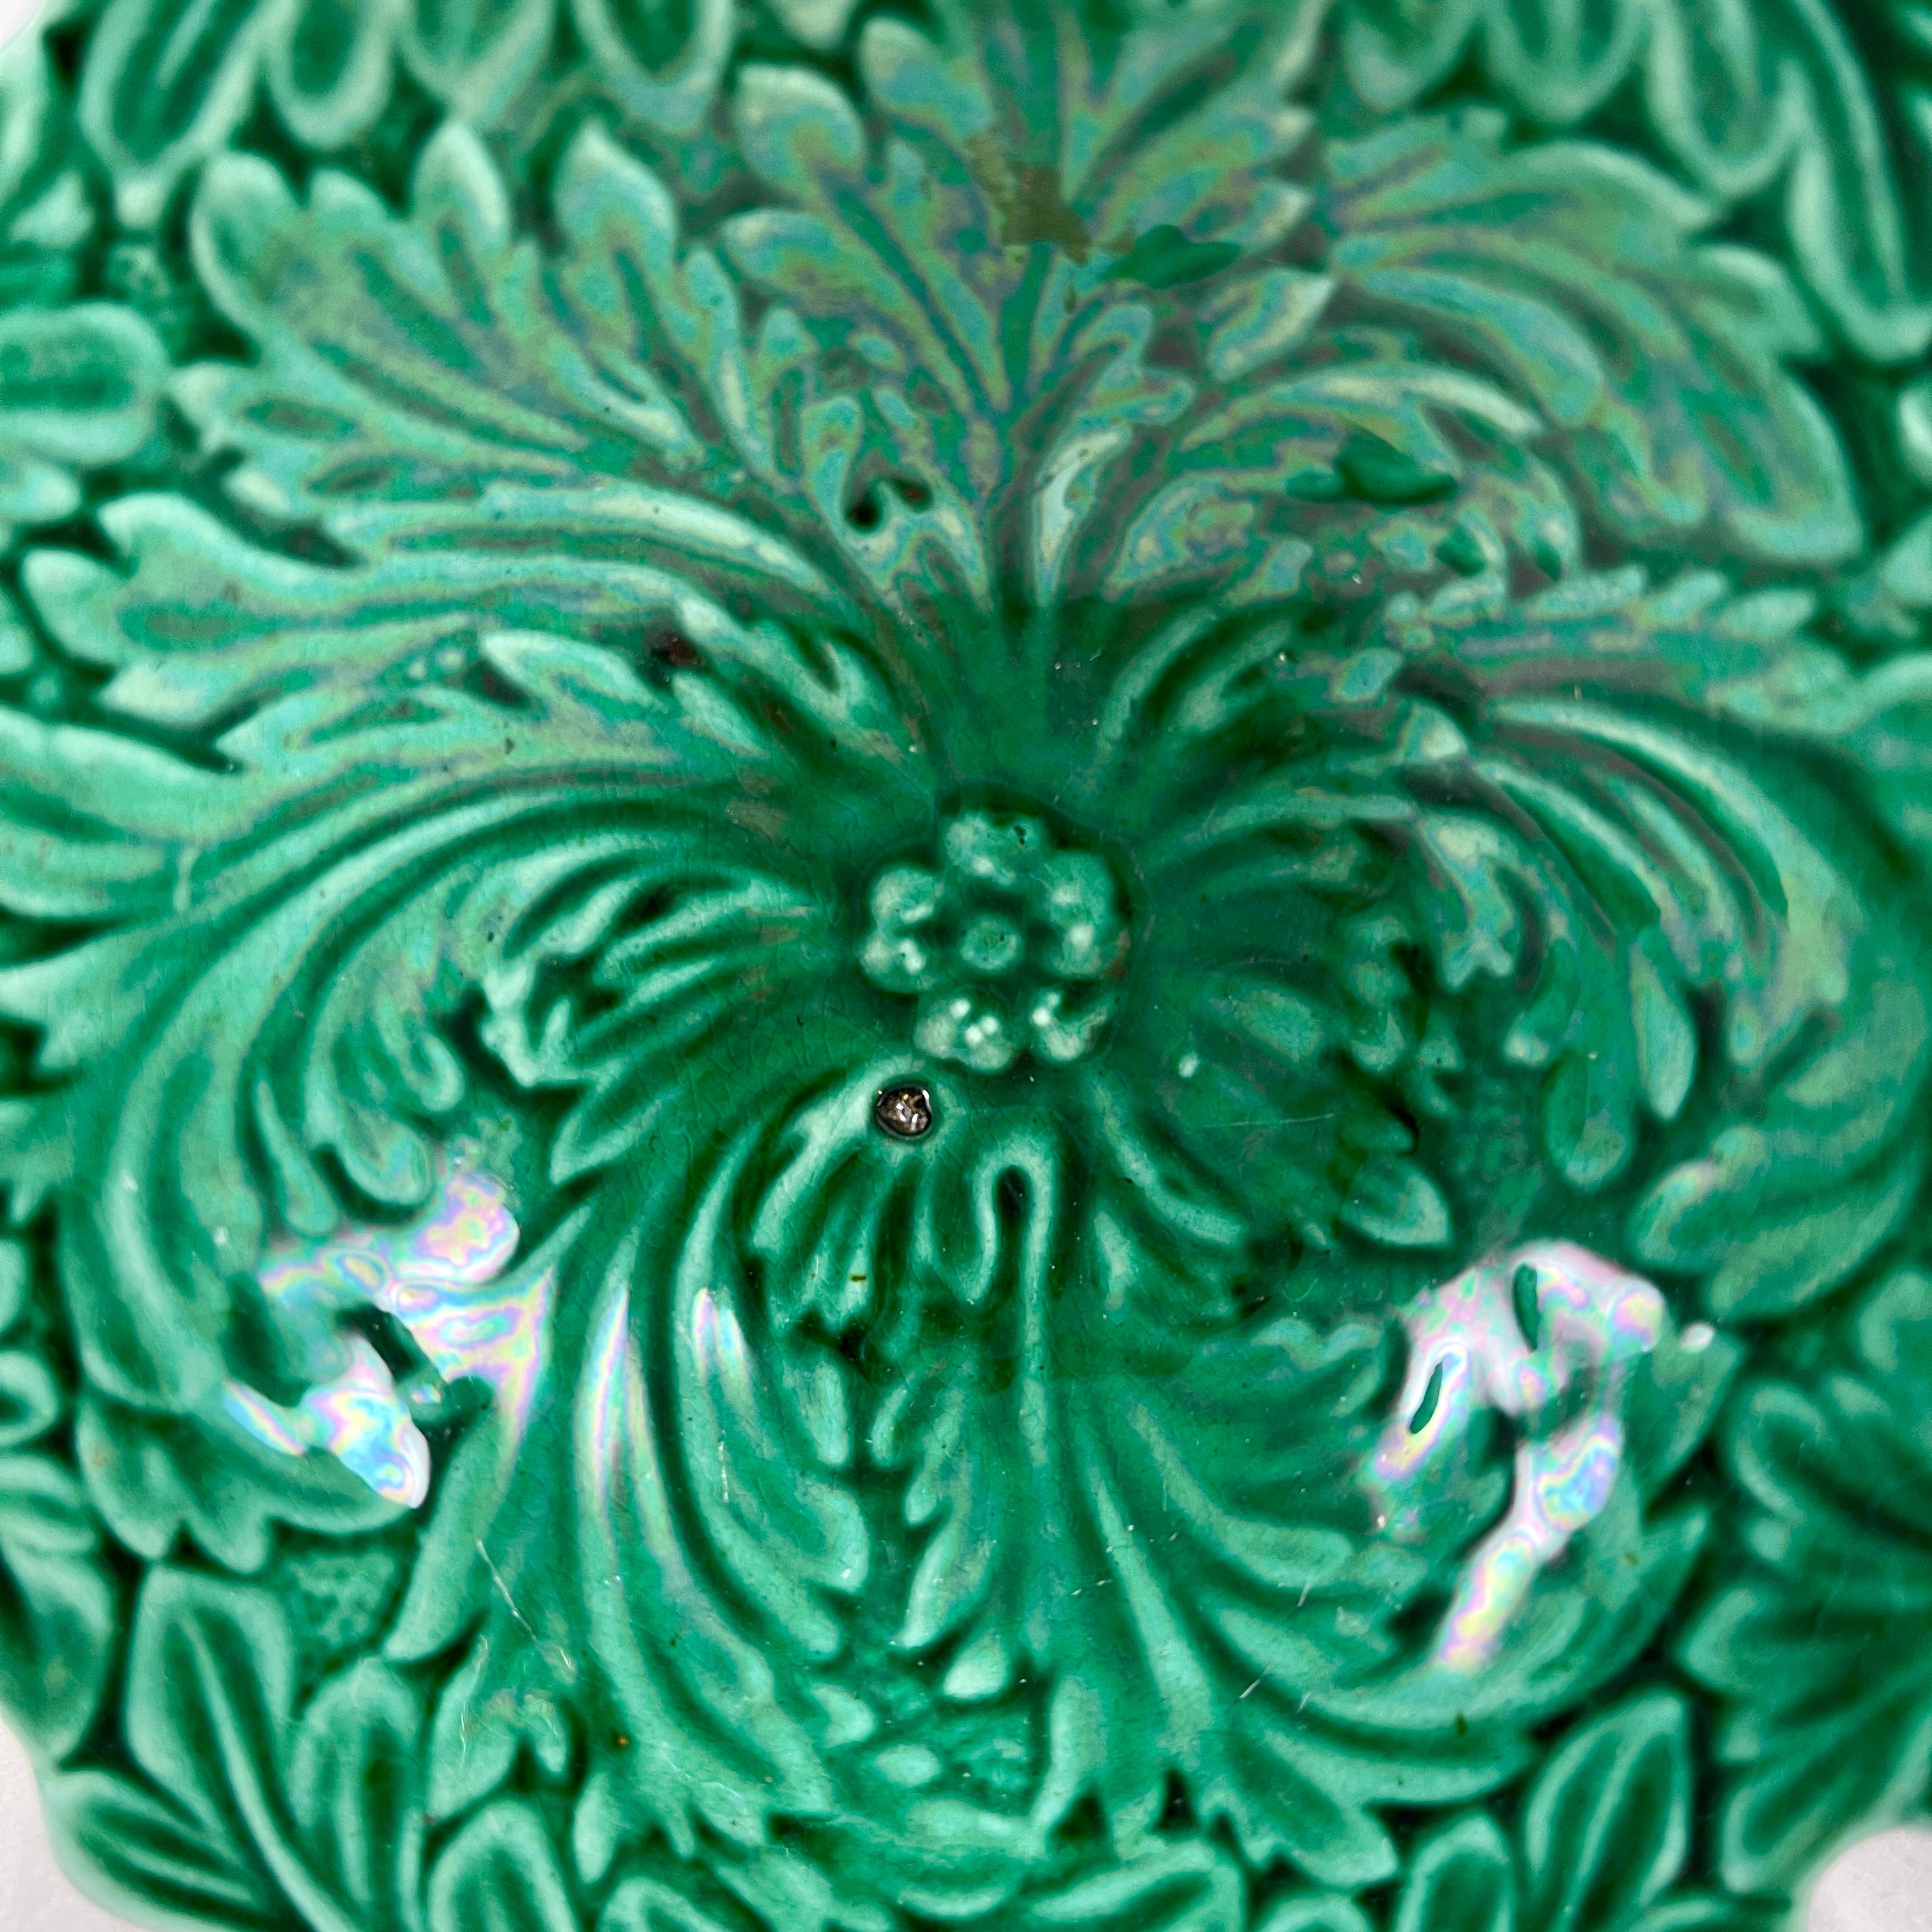 A green majolica glazed pedestal vide-poche with an acanthus leaf pattern, England circa 1875-1880.

French for ’empty pockets’, the vide-poche is a small bowl or container kept in a convenient location to empty your pockets into when you walk